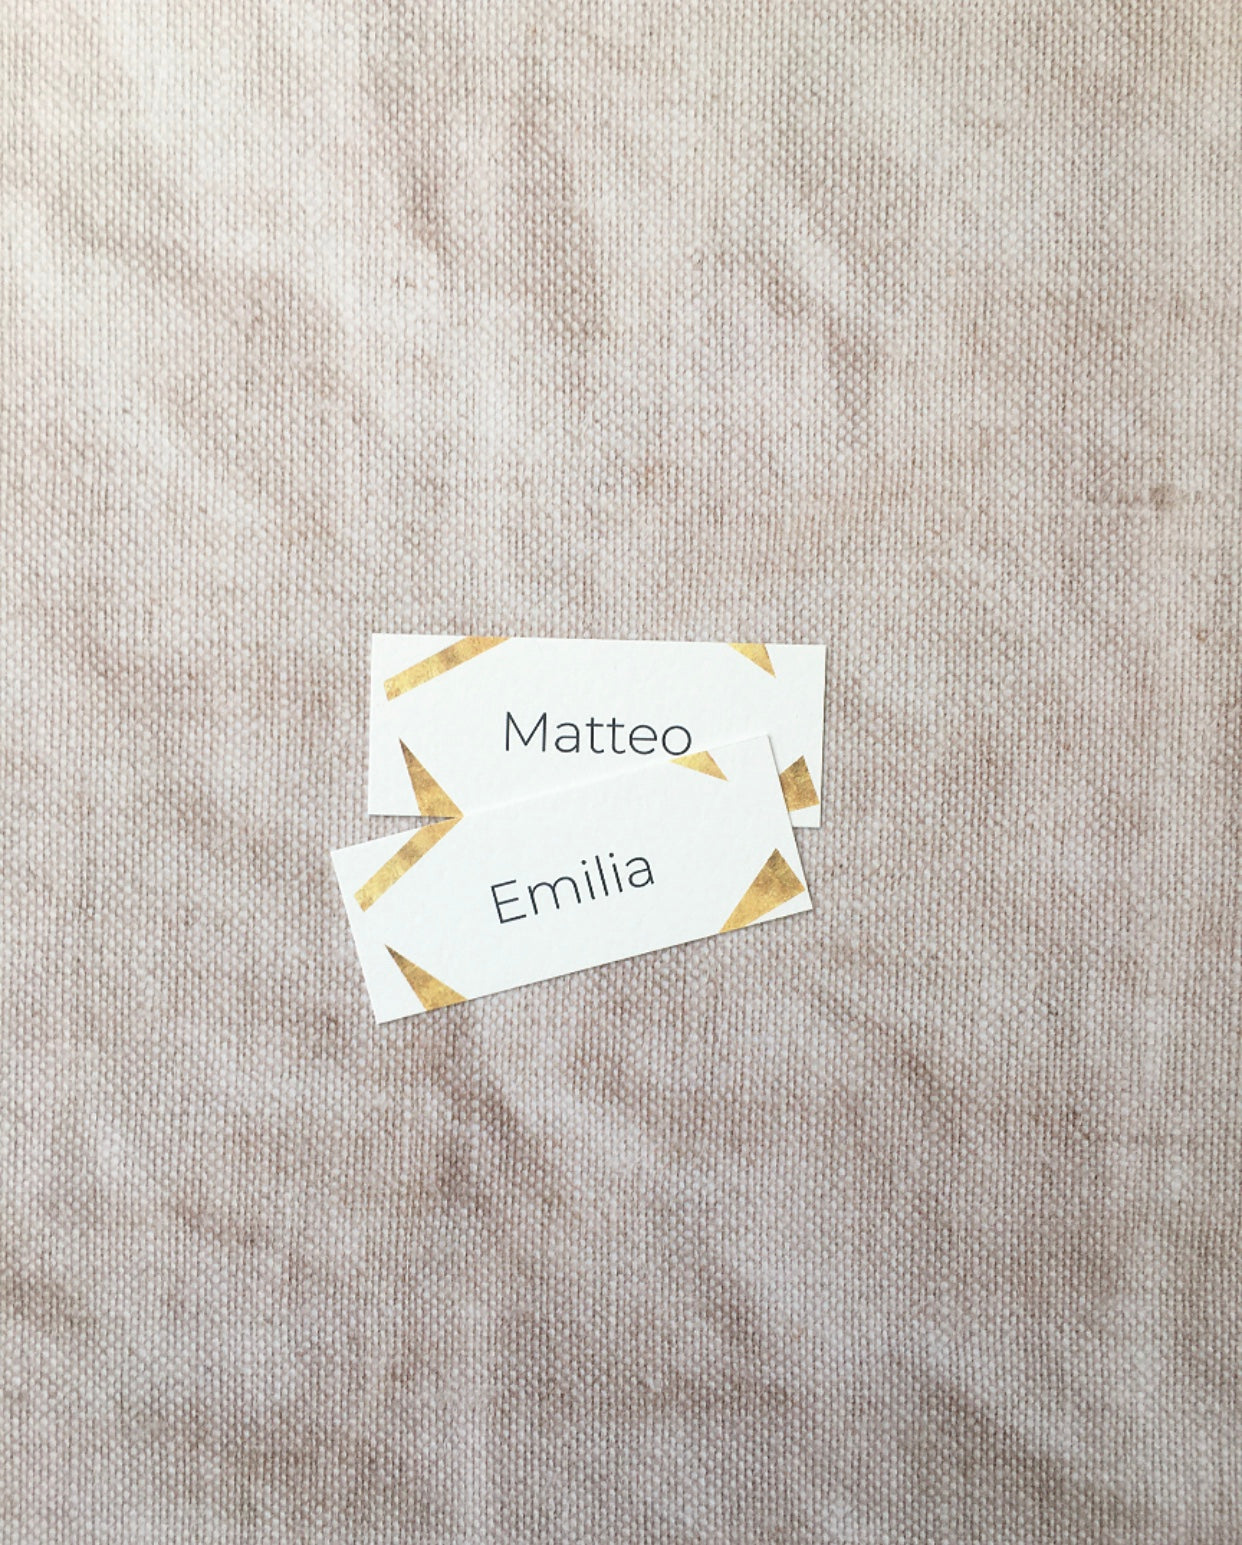 White & Gold Art Deco-Style Wedding Place Name Cards